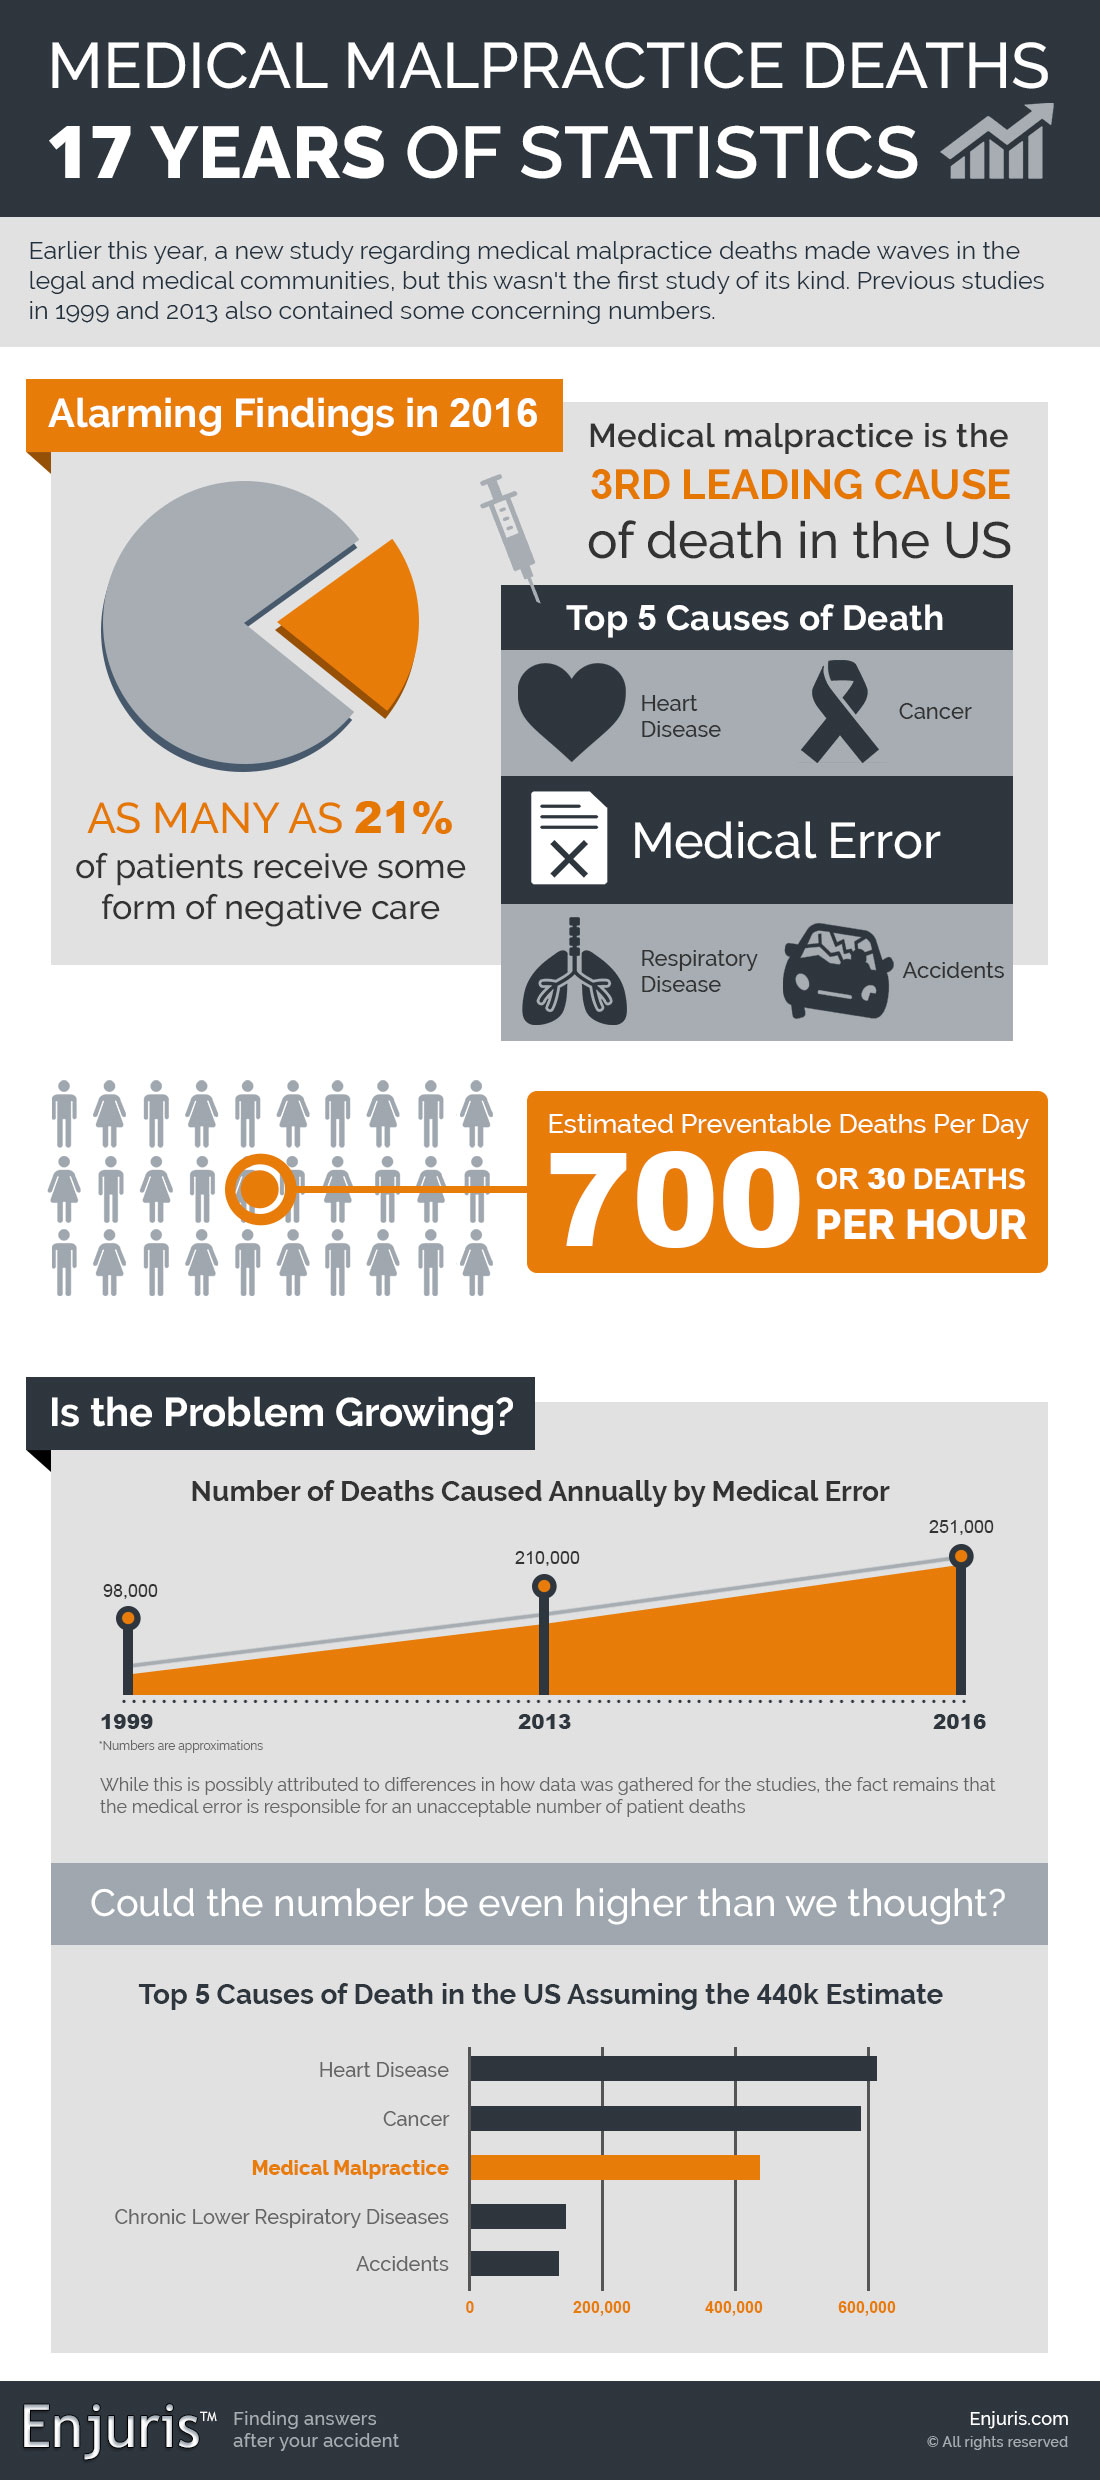 Medical Malpractice Deaths - 17 Years of Statistics